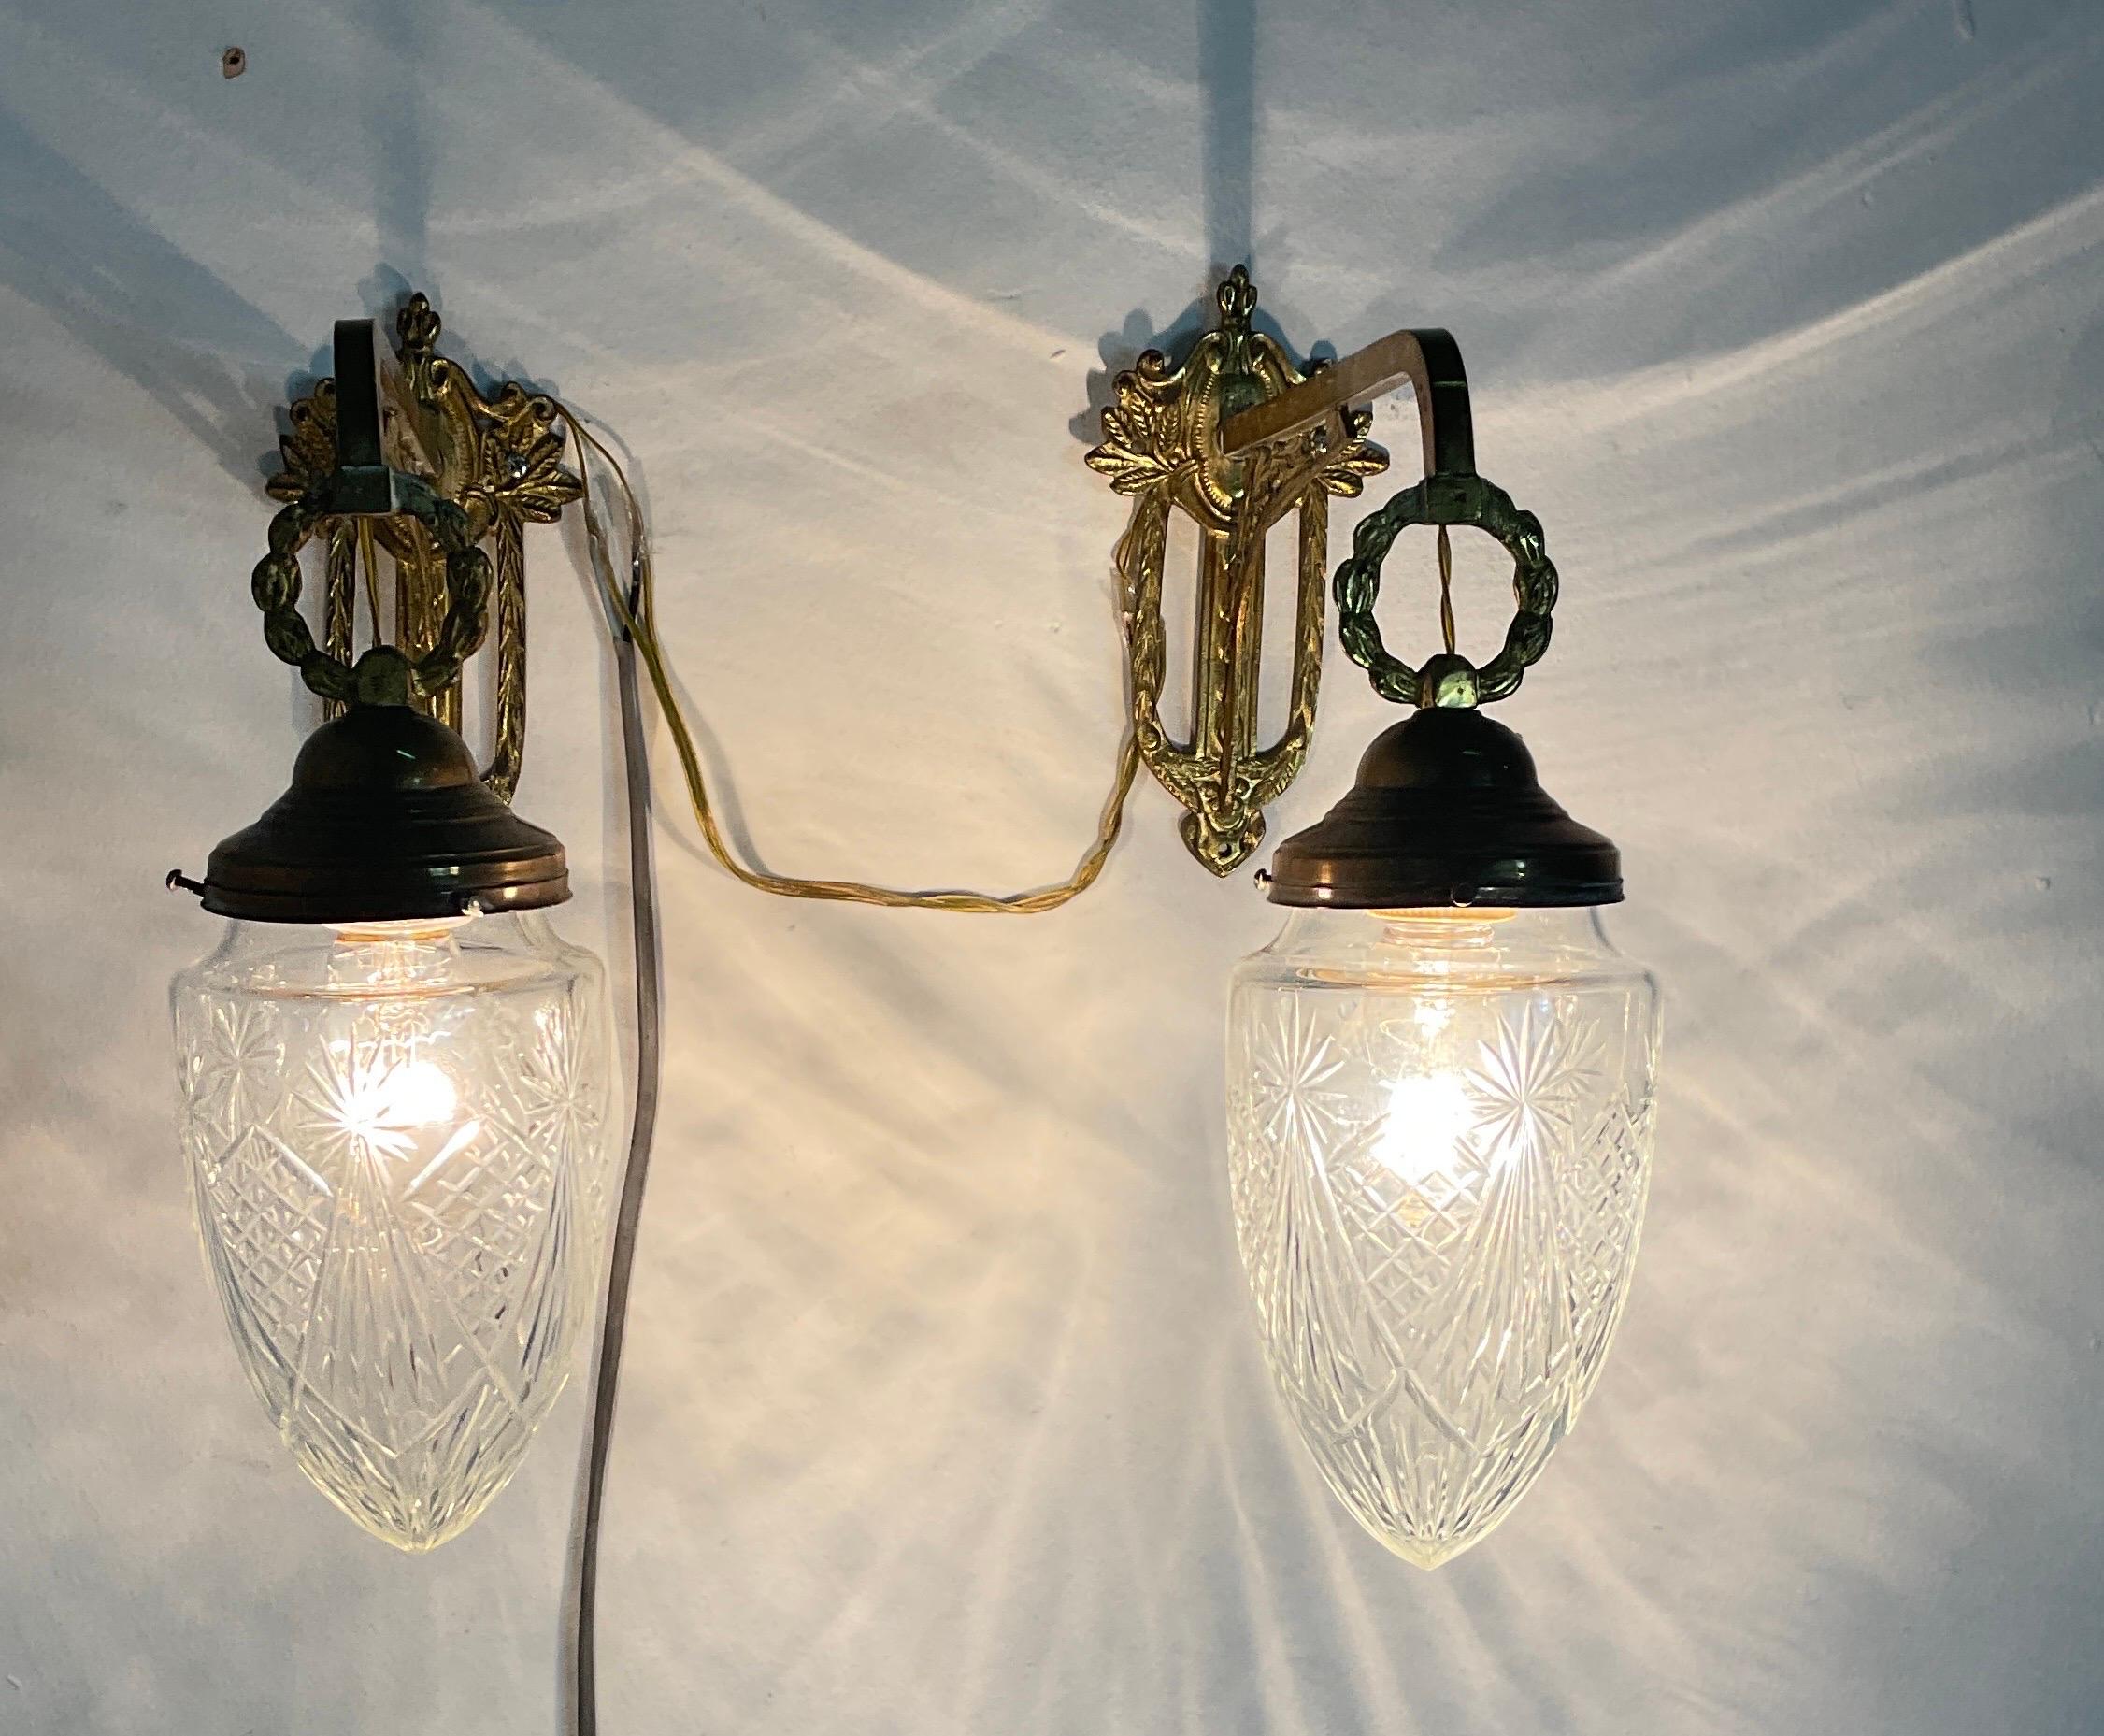 1950s Art Nouveau brass wall lamp with glass bowls at the end. Applique in good condition with small wear caused by use and the passing of years. The characteristics of this style consist of motifs inspired directly by the truth, especially by the